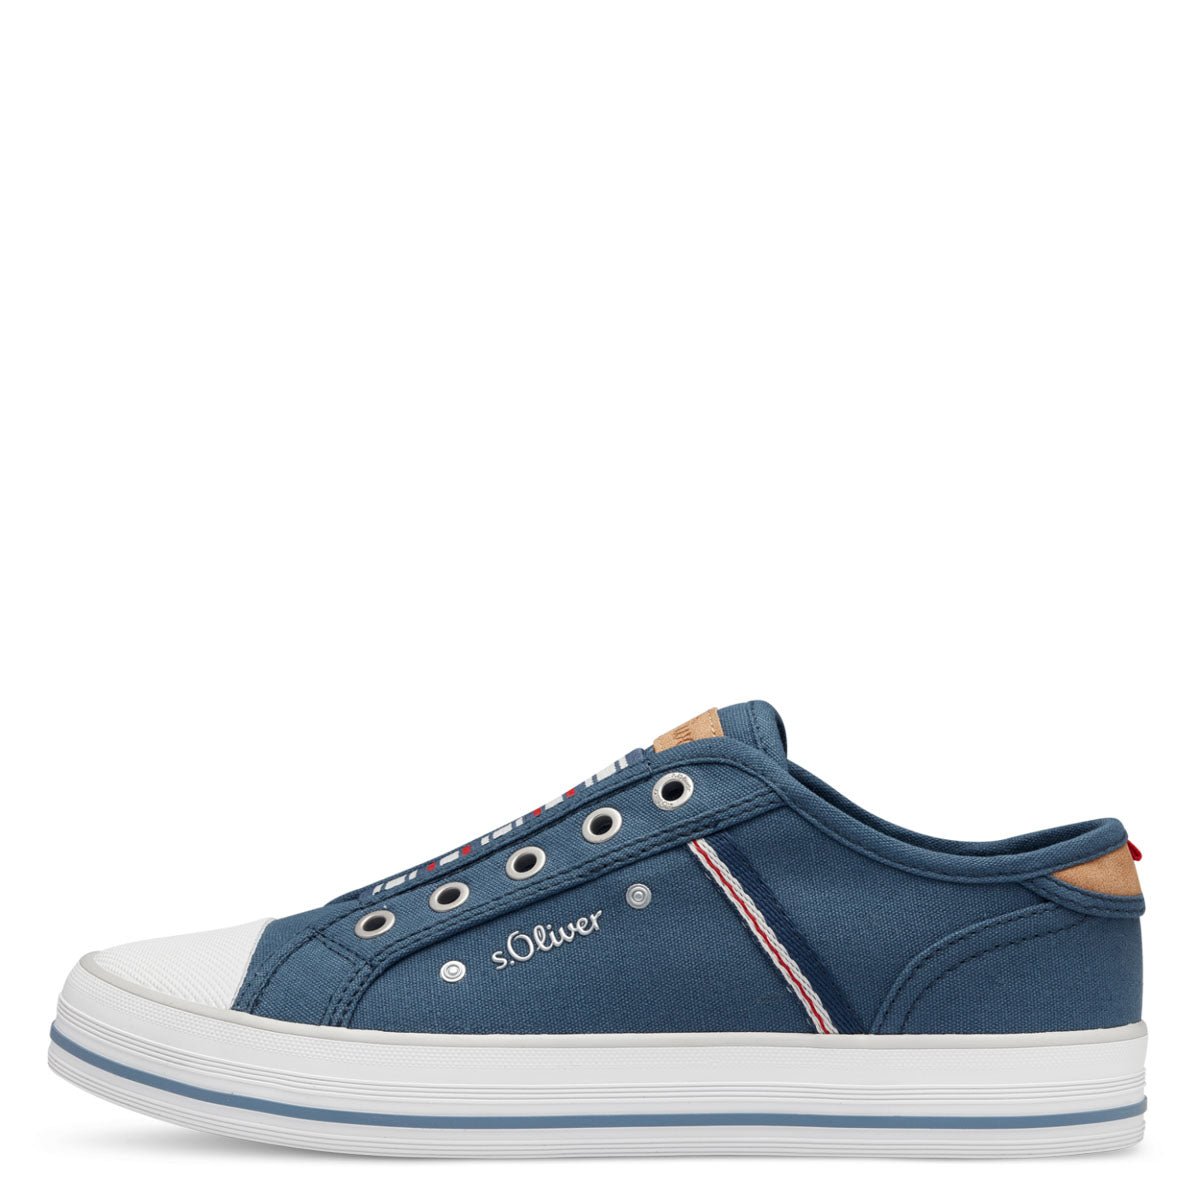     Front view of S Oliver navy canvas slip-on sneakers with white sole and toe cap.